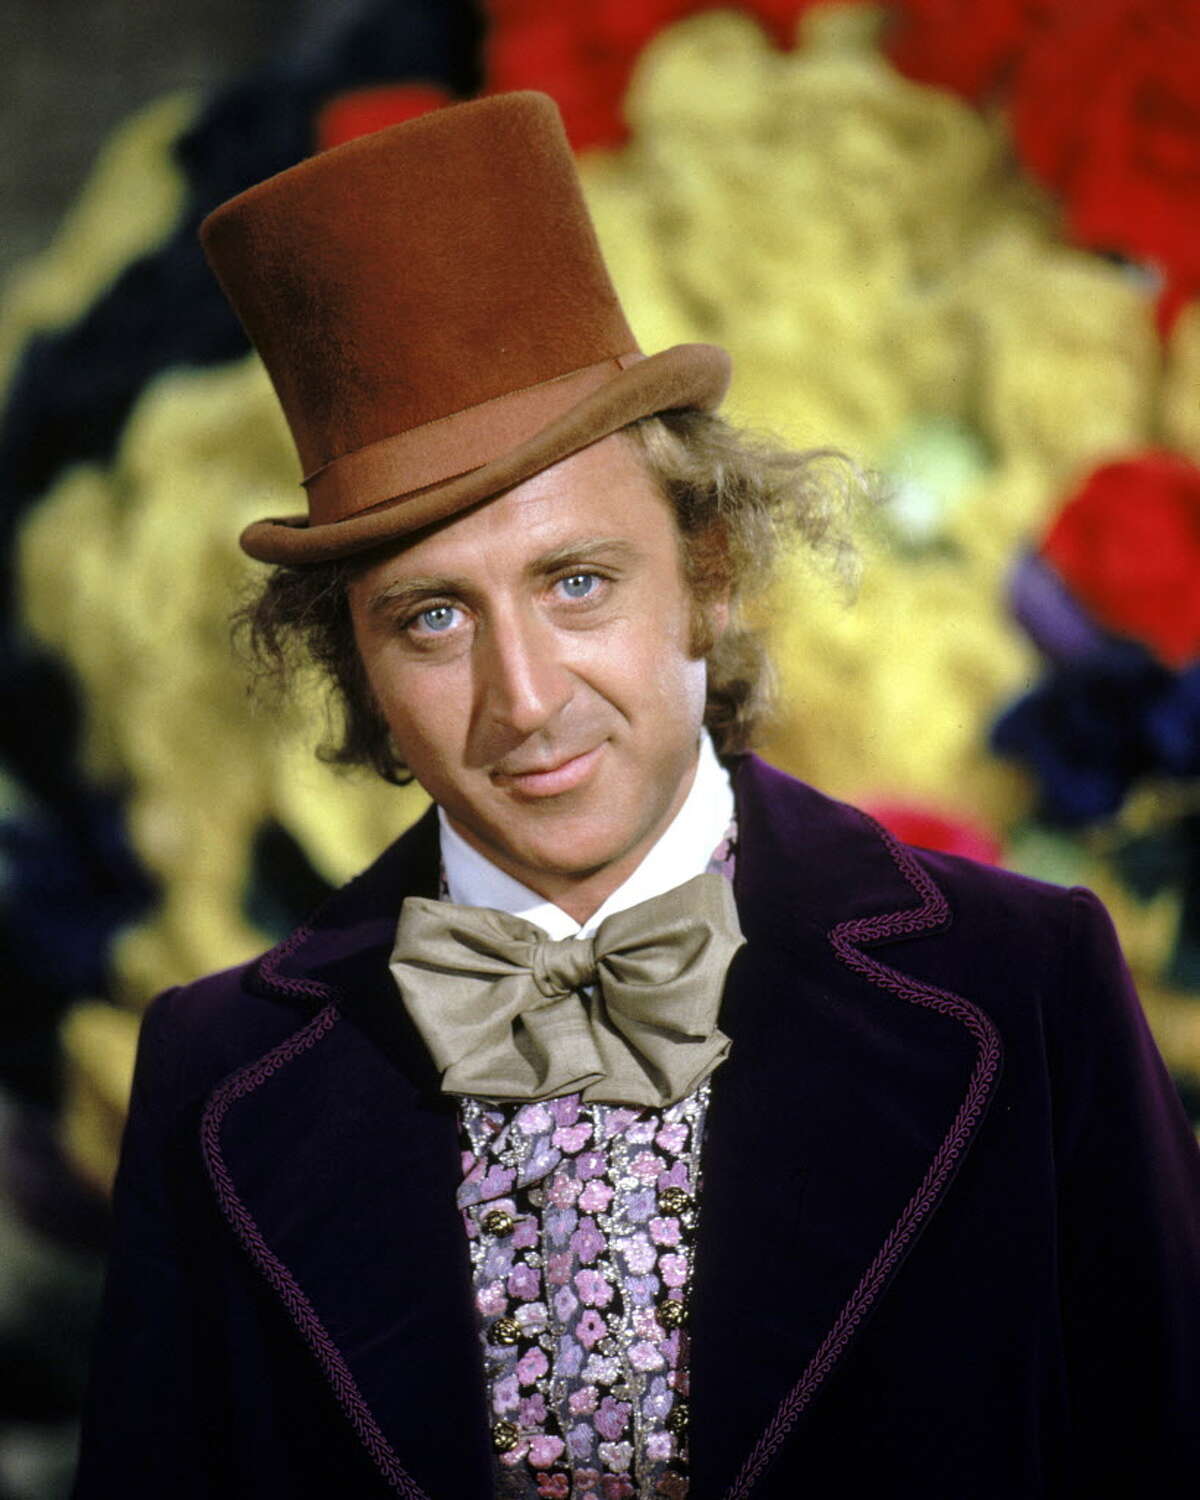 Willy Wonka What you'll need: Top hat, purple jacket, oversized bowtie, cane. (Optional: Candy) Background: In honor of former Stamford resident Gene Wilder, who passed away on Aug. 29, 2016, dress up as the "wonderiferous" candy maker himself from “Willy Wonka & The Chocolate Factory.” Read the story.